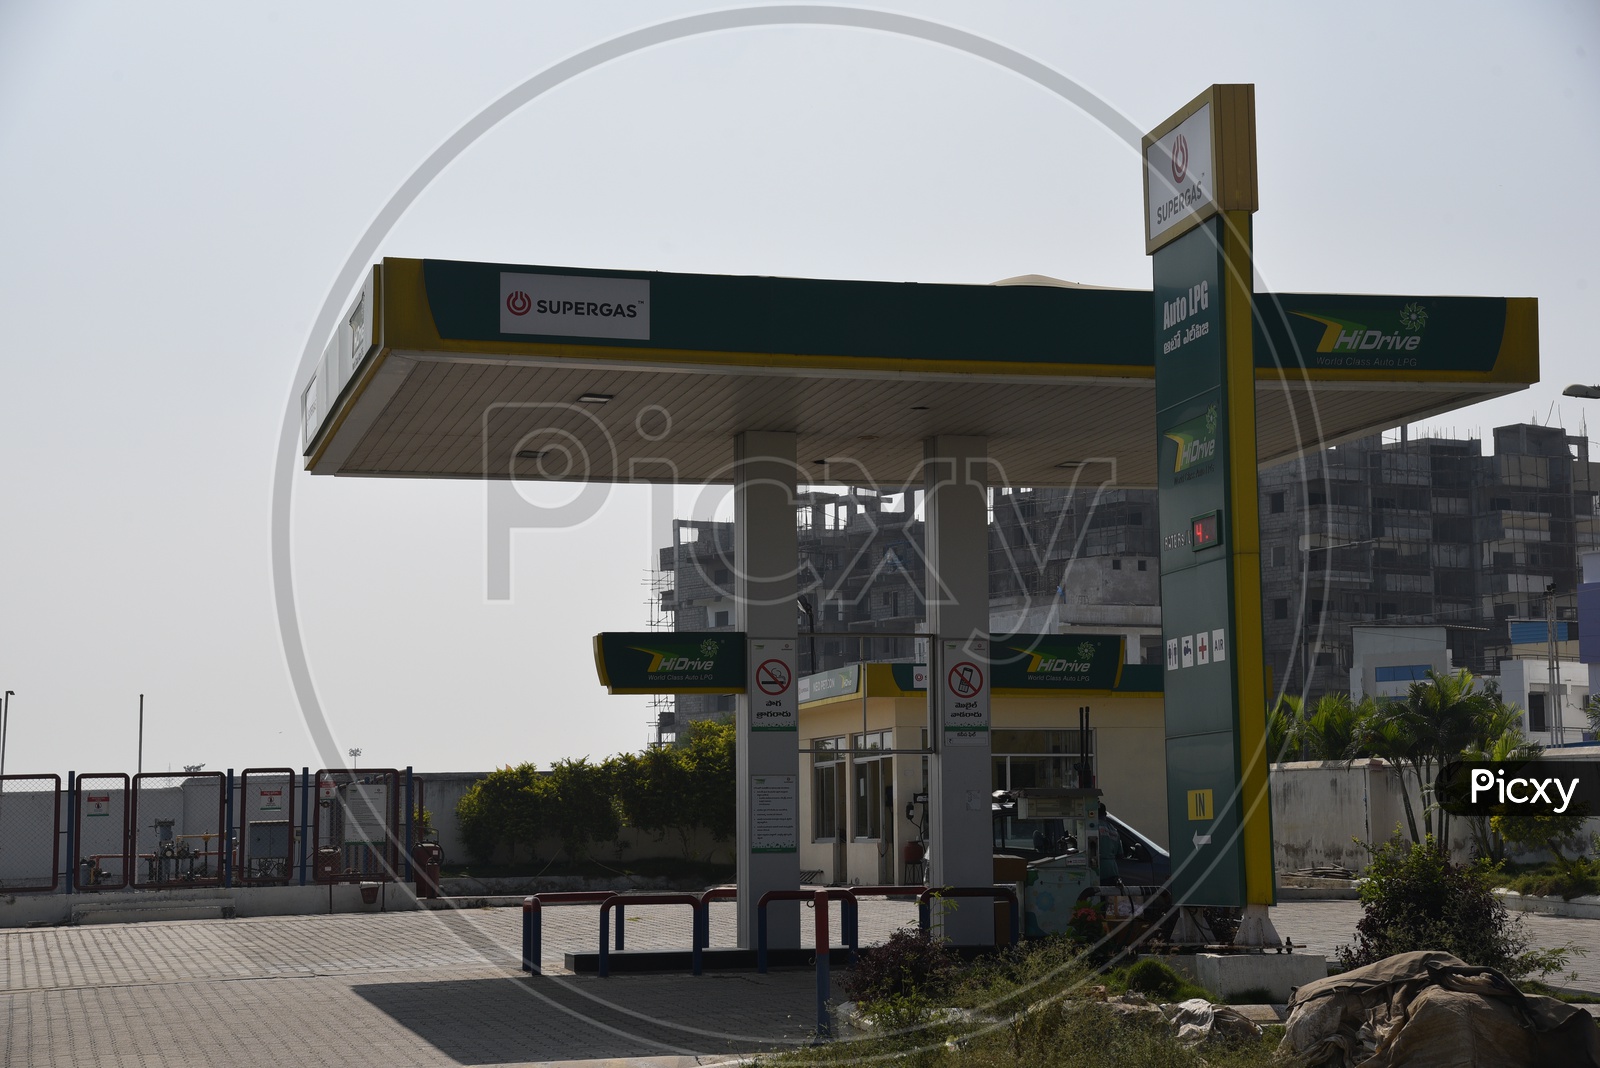 Auto LPG Gas Station or Super Gas Station in Hyderabad City